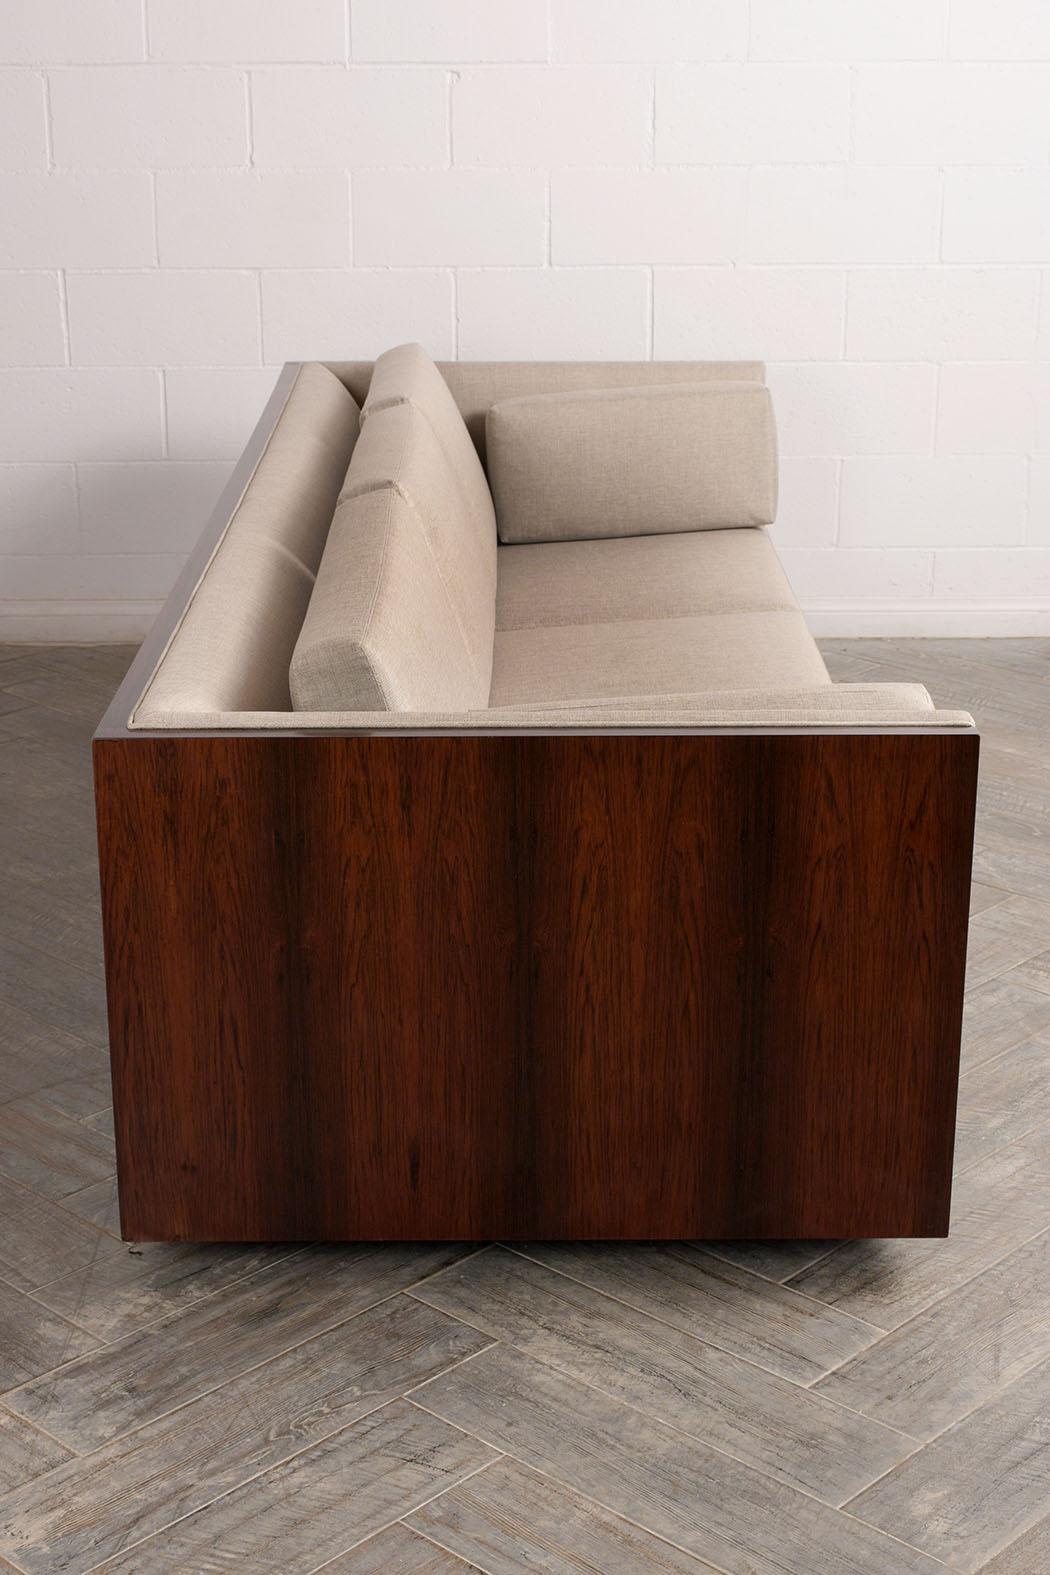 Hand-Crafted 1960s Milo Baughman Cube Sofa Completely Restored